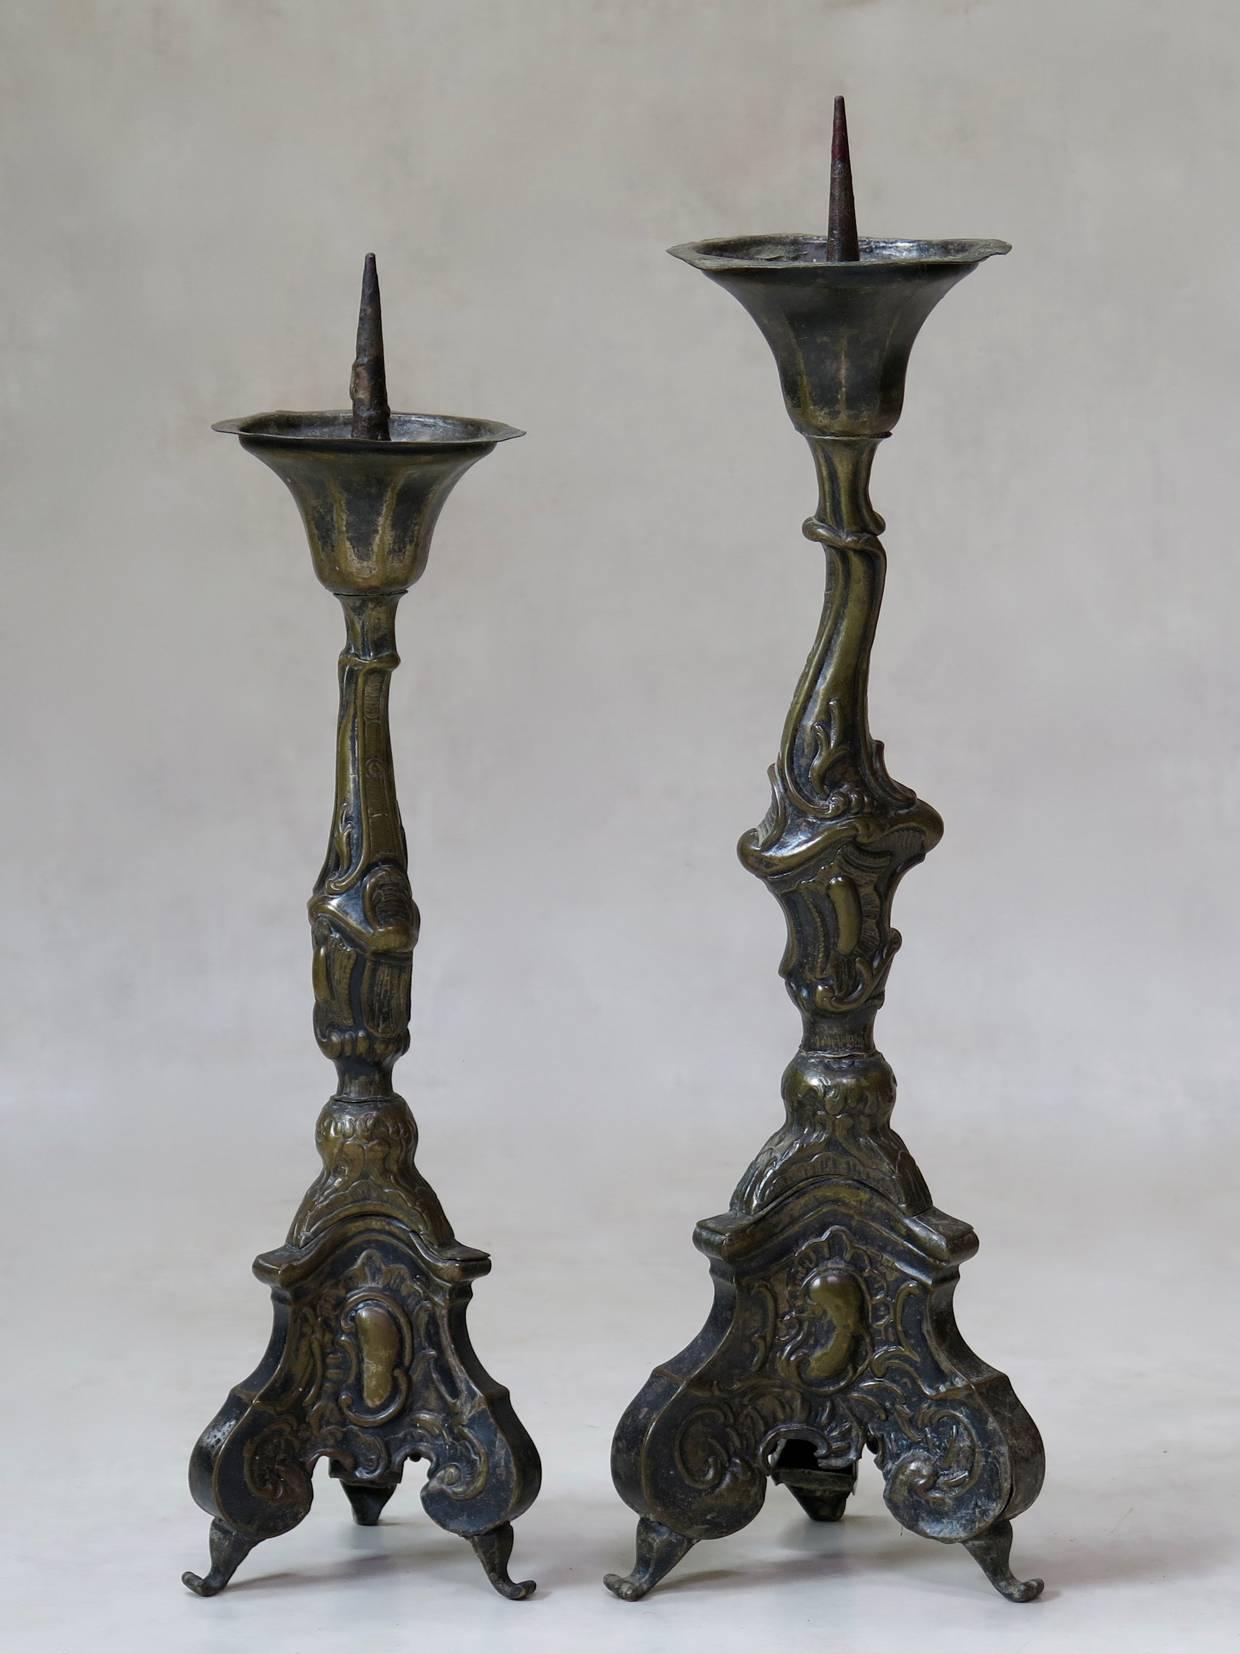 Unusual faux pair of large repoussé copper candlesticks in the style of Louis XV.

Dimensions provided below are for the taller candlestick. The smaller one measures (in centimeters):

Height: 53.
Diameter: 16.